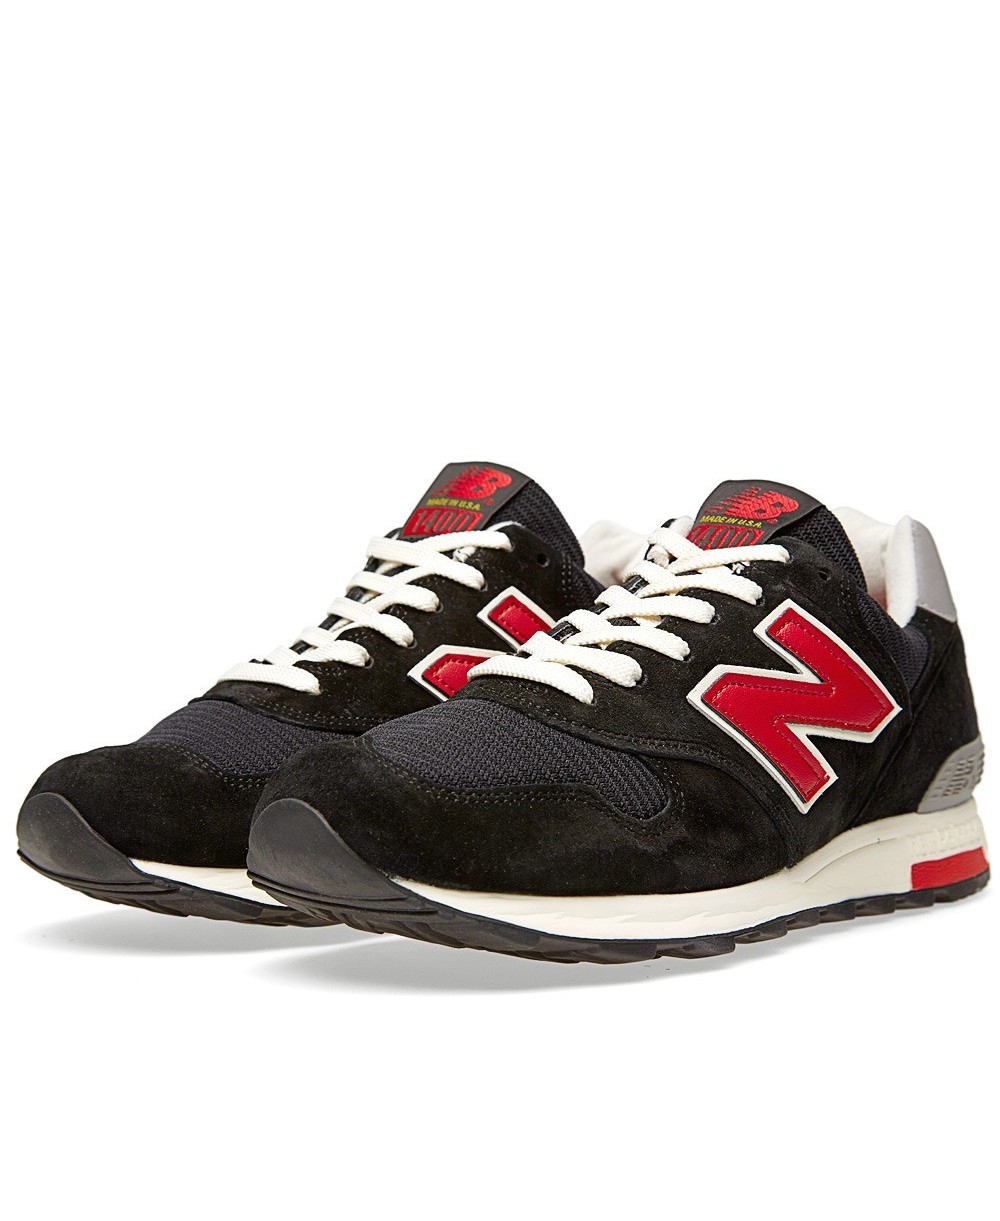 new balance mens shoes made in usa